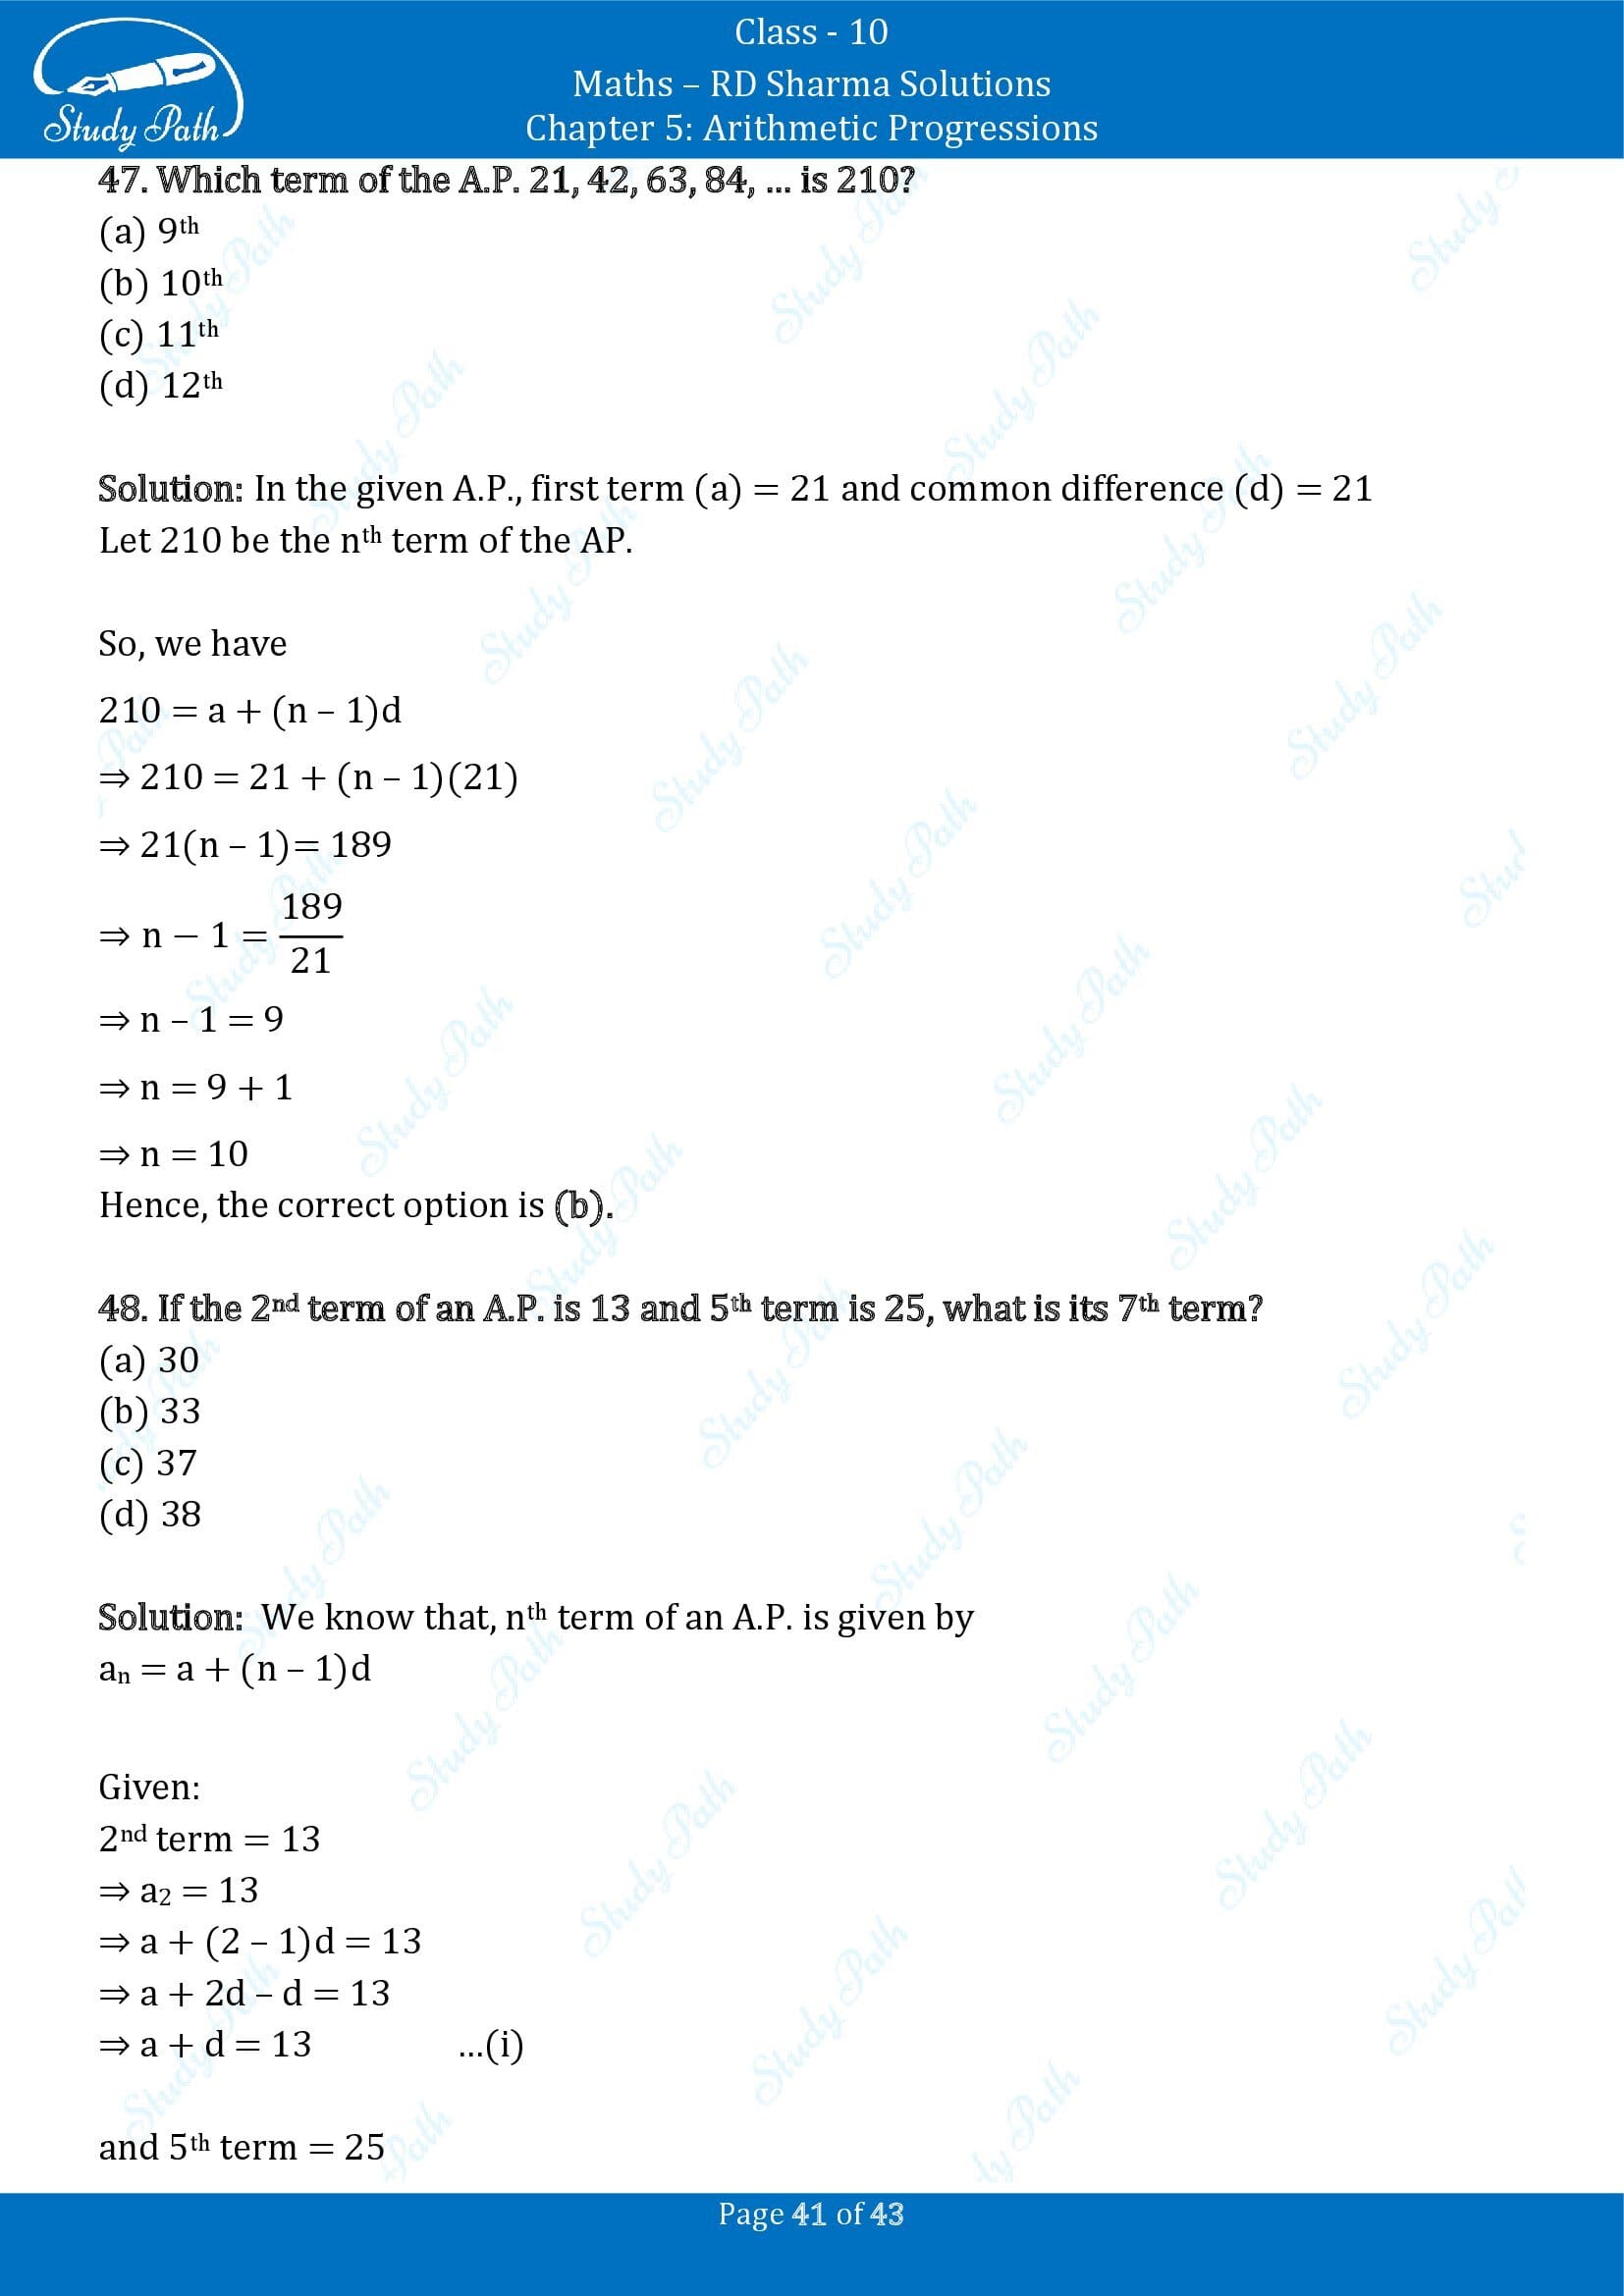 RD Sharma Solutions Class 10 Chapter 5 Arithmetic Progressions Multiple Choice Question MCQs 00041